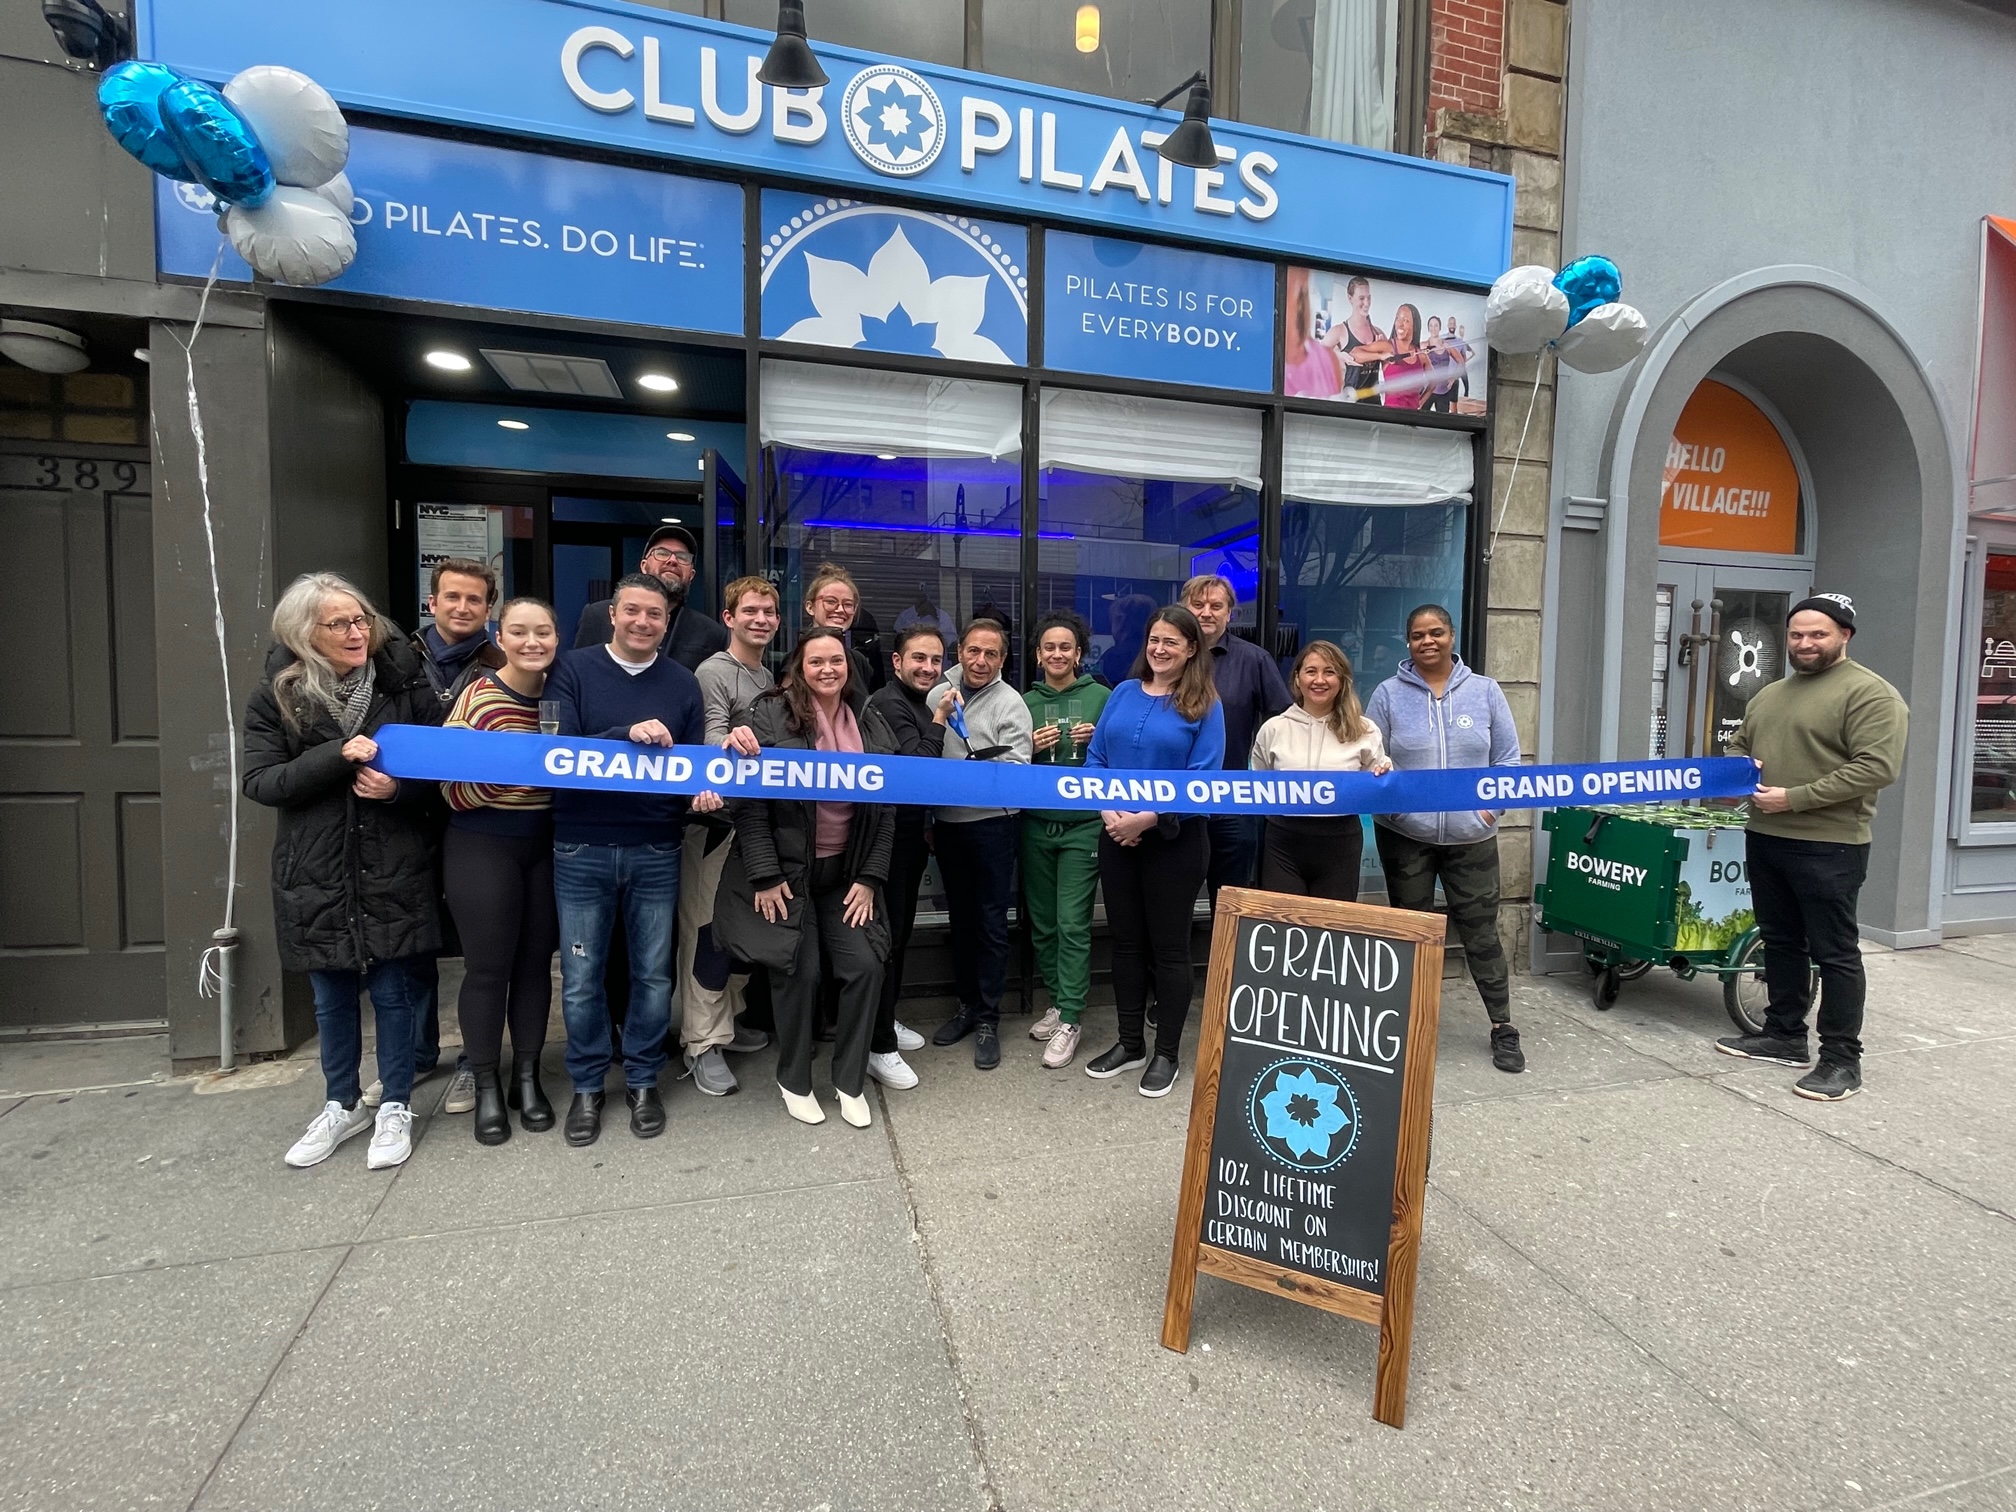 Welcome to the Chamber, Club Pilates West Village!